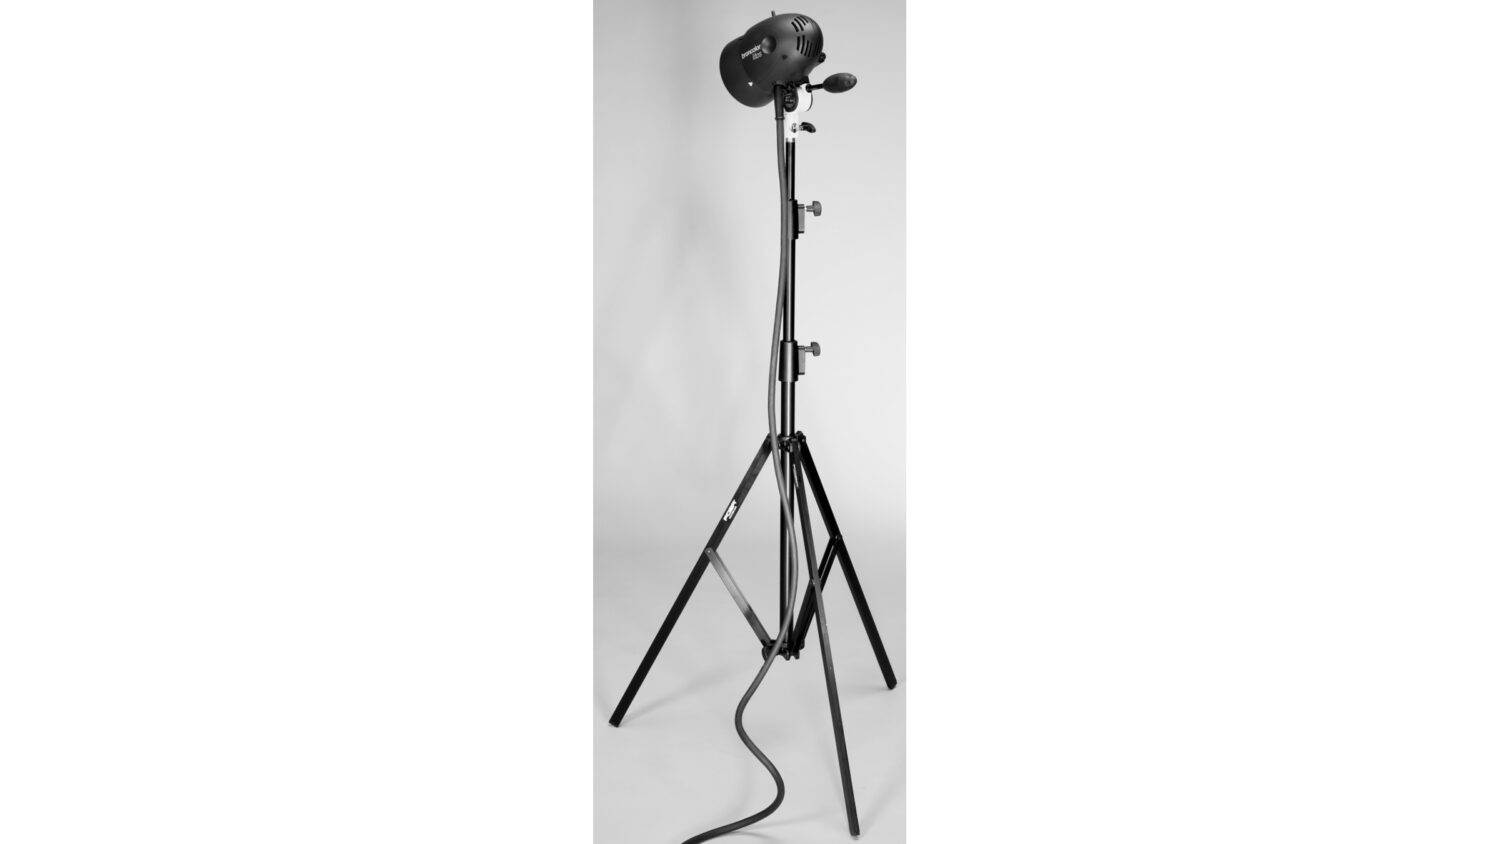 FOBA lamp stand with telescope tube extension